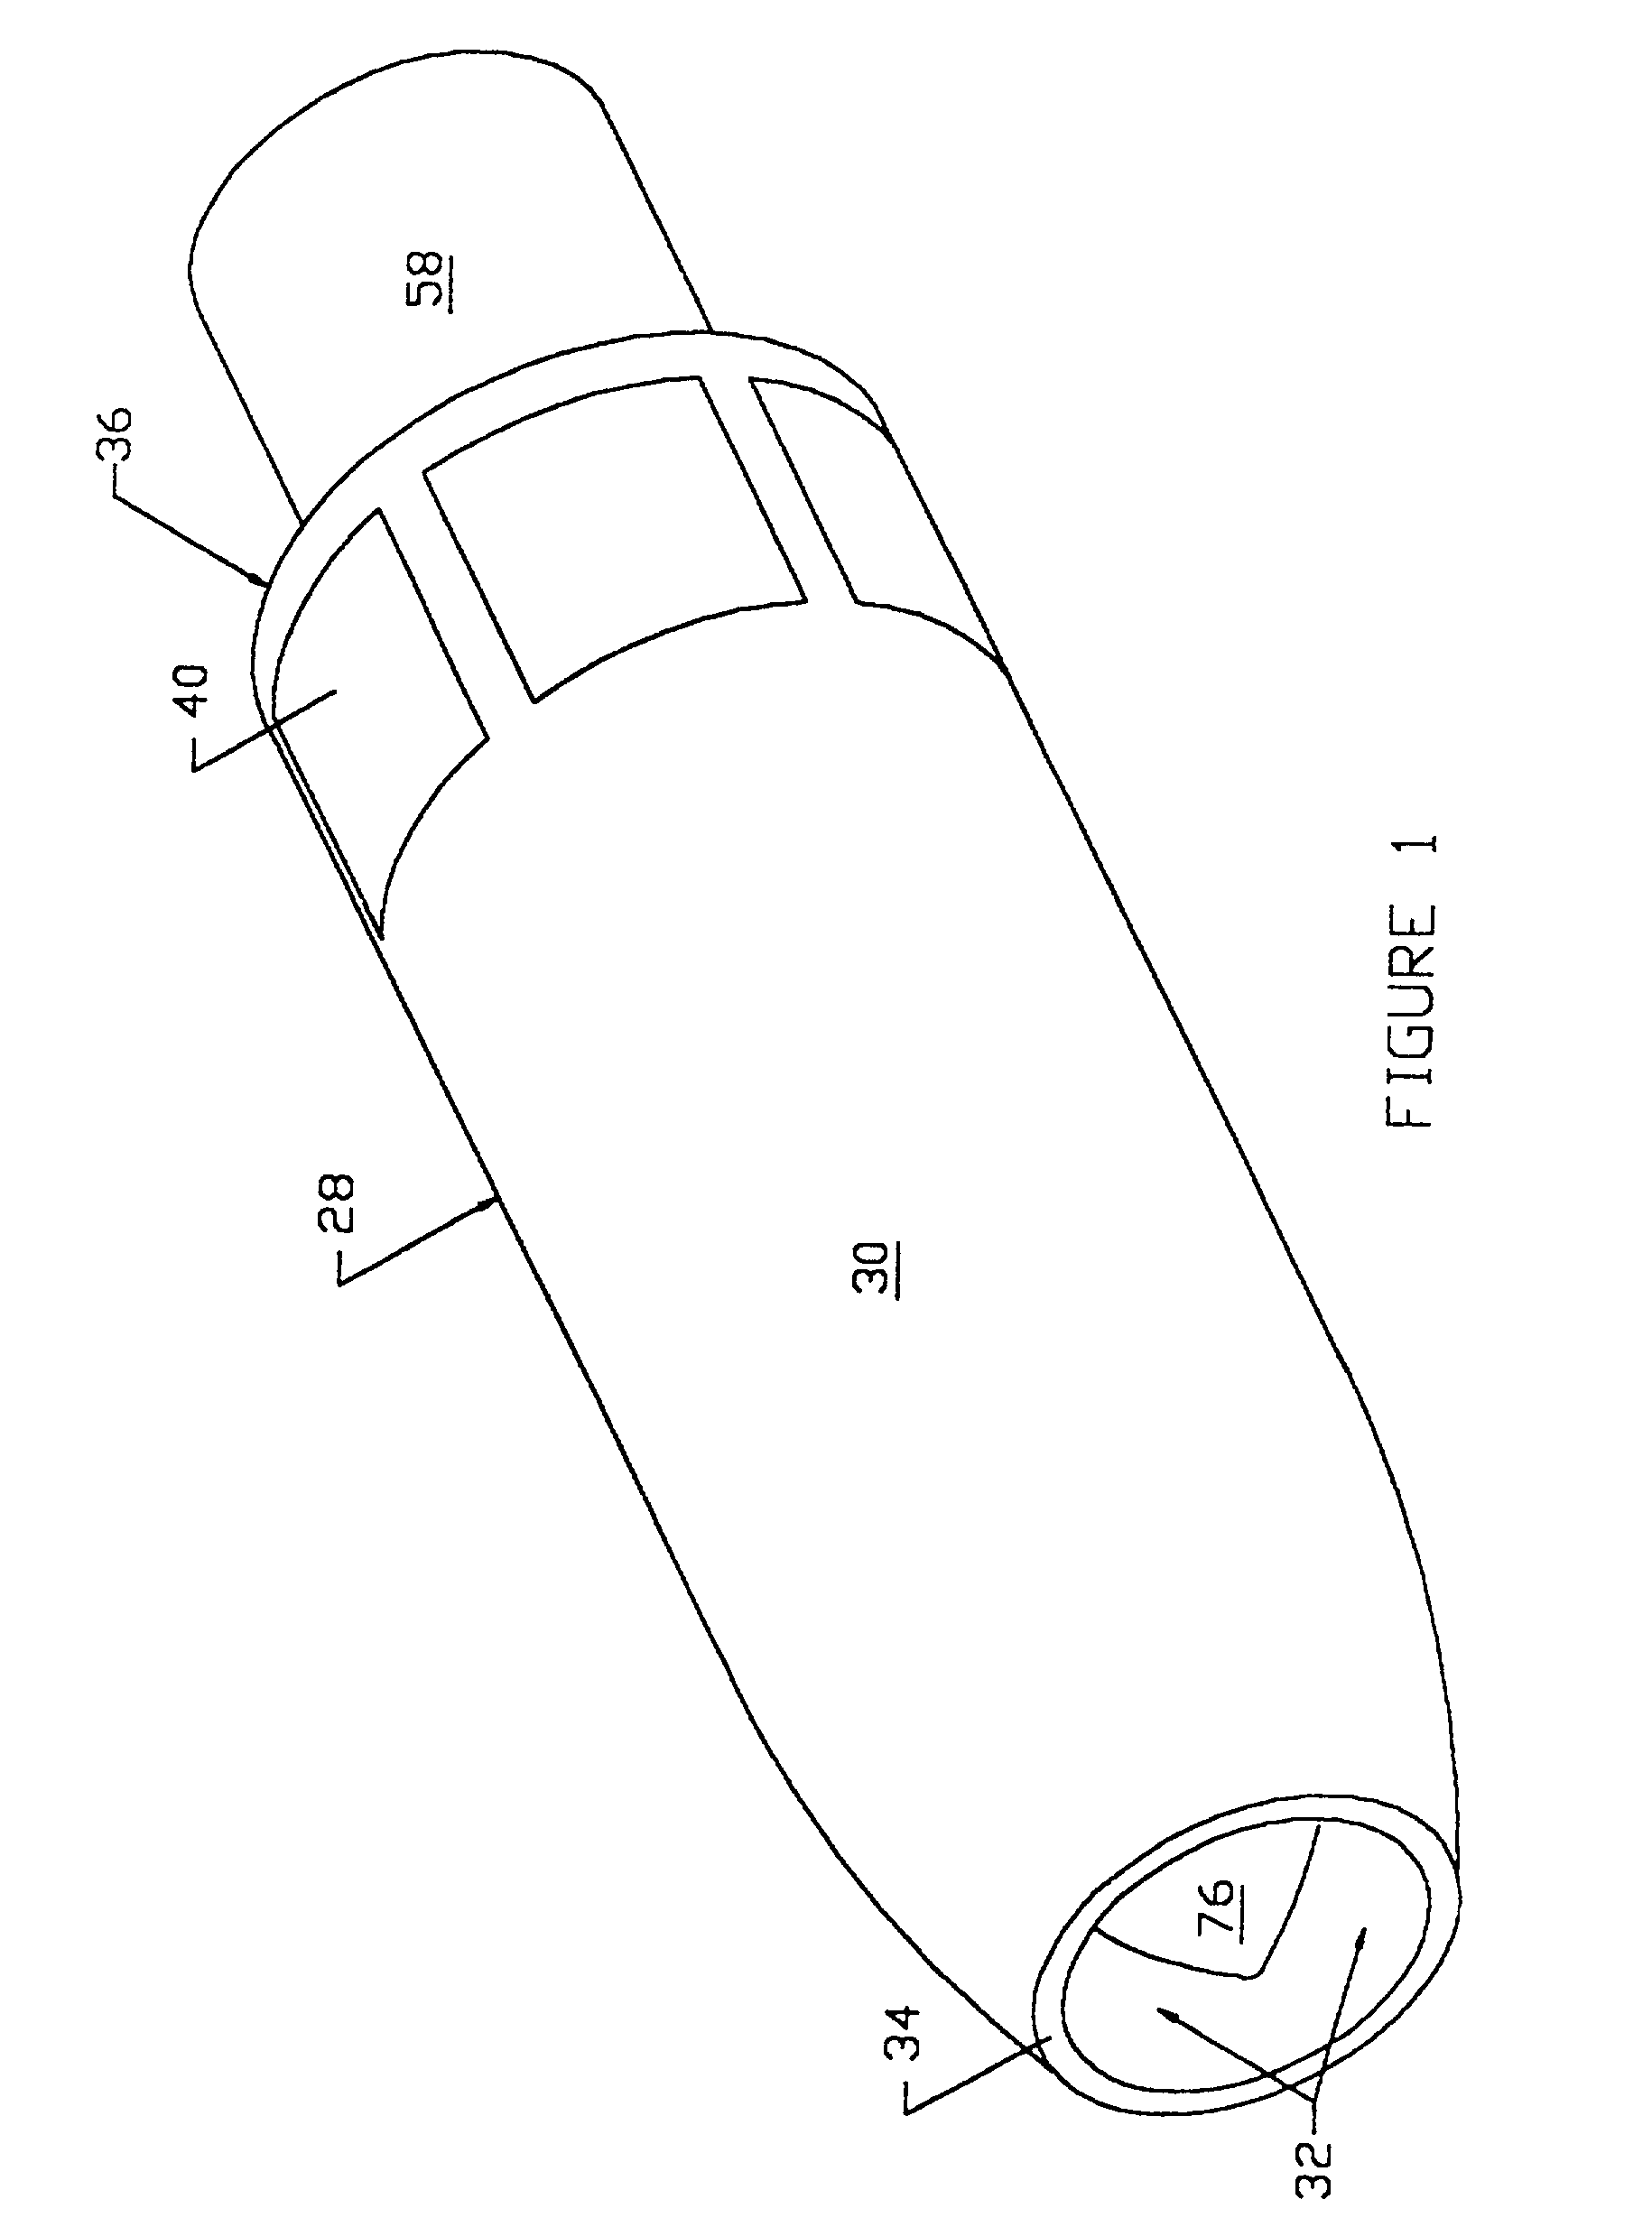 Low drag ducted ram air turbine generator and cooling system